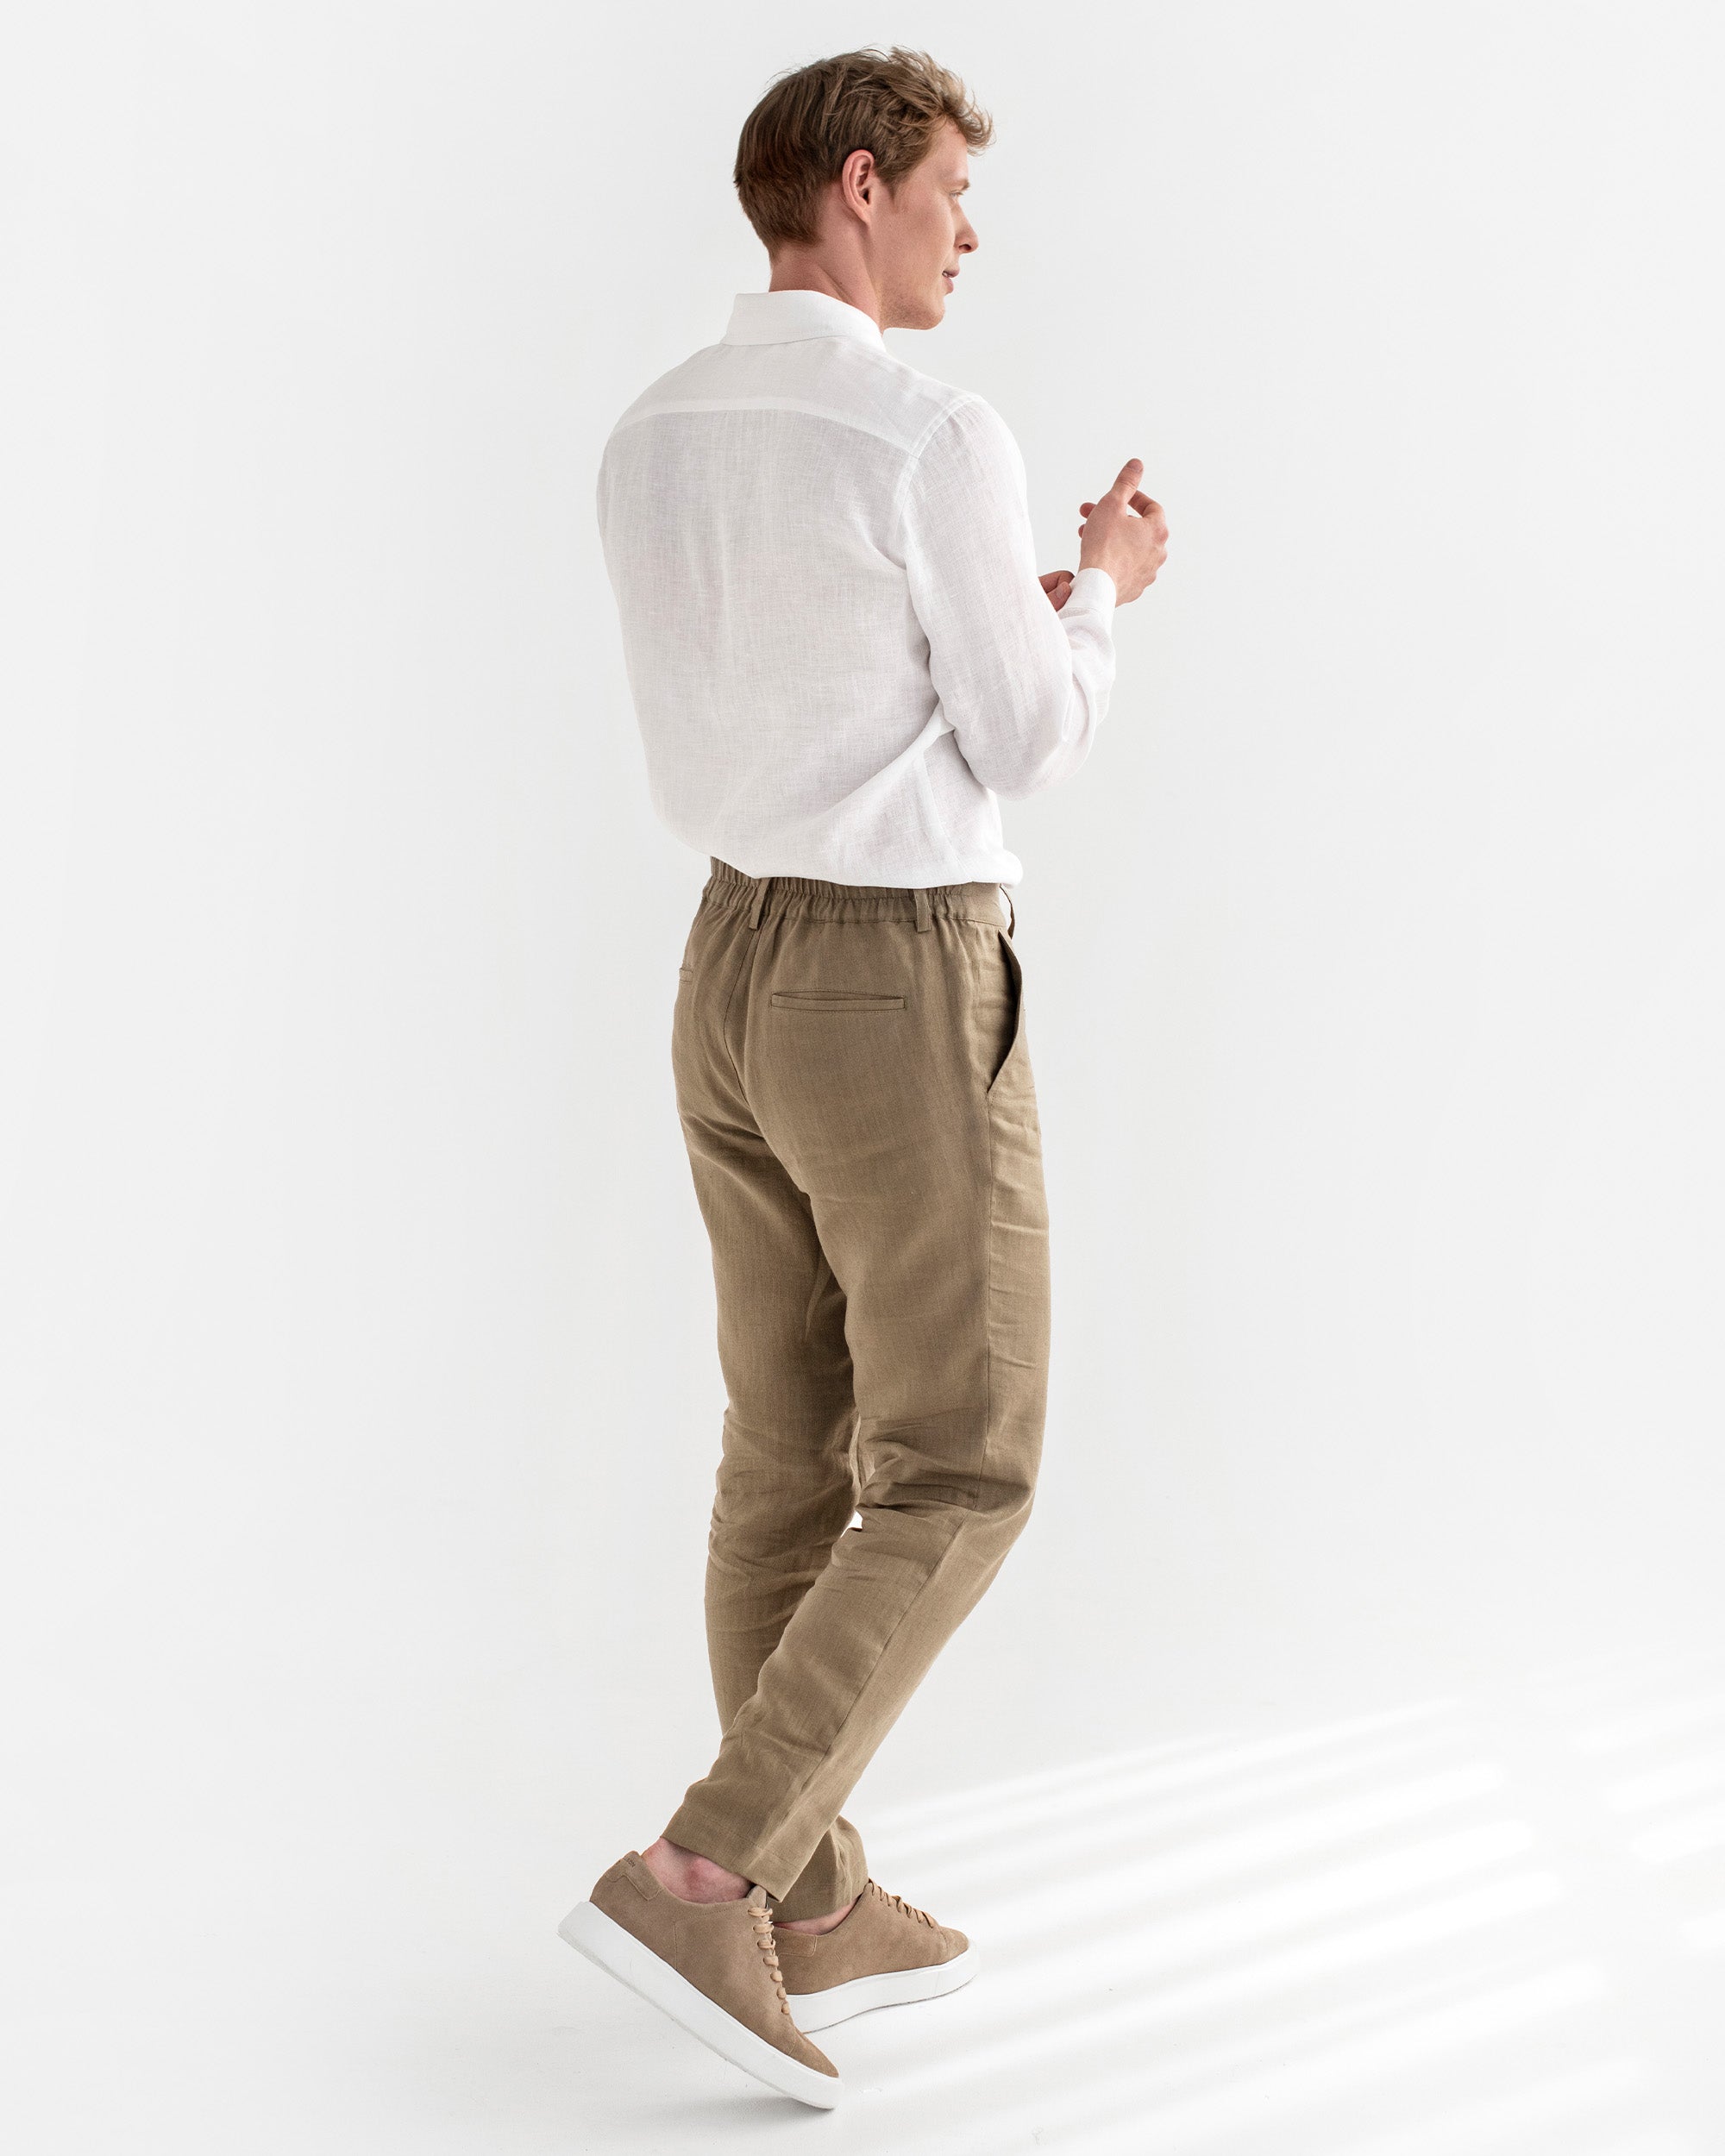 Velasca | Green pleated linen pants, made in Italy